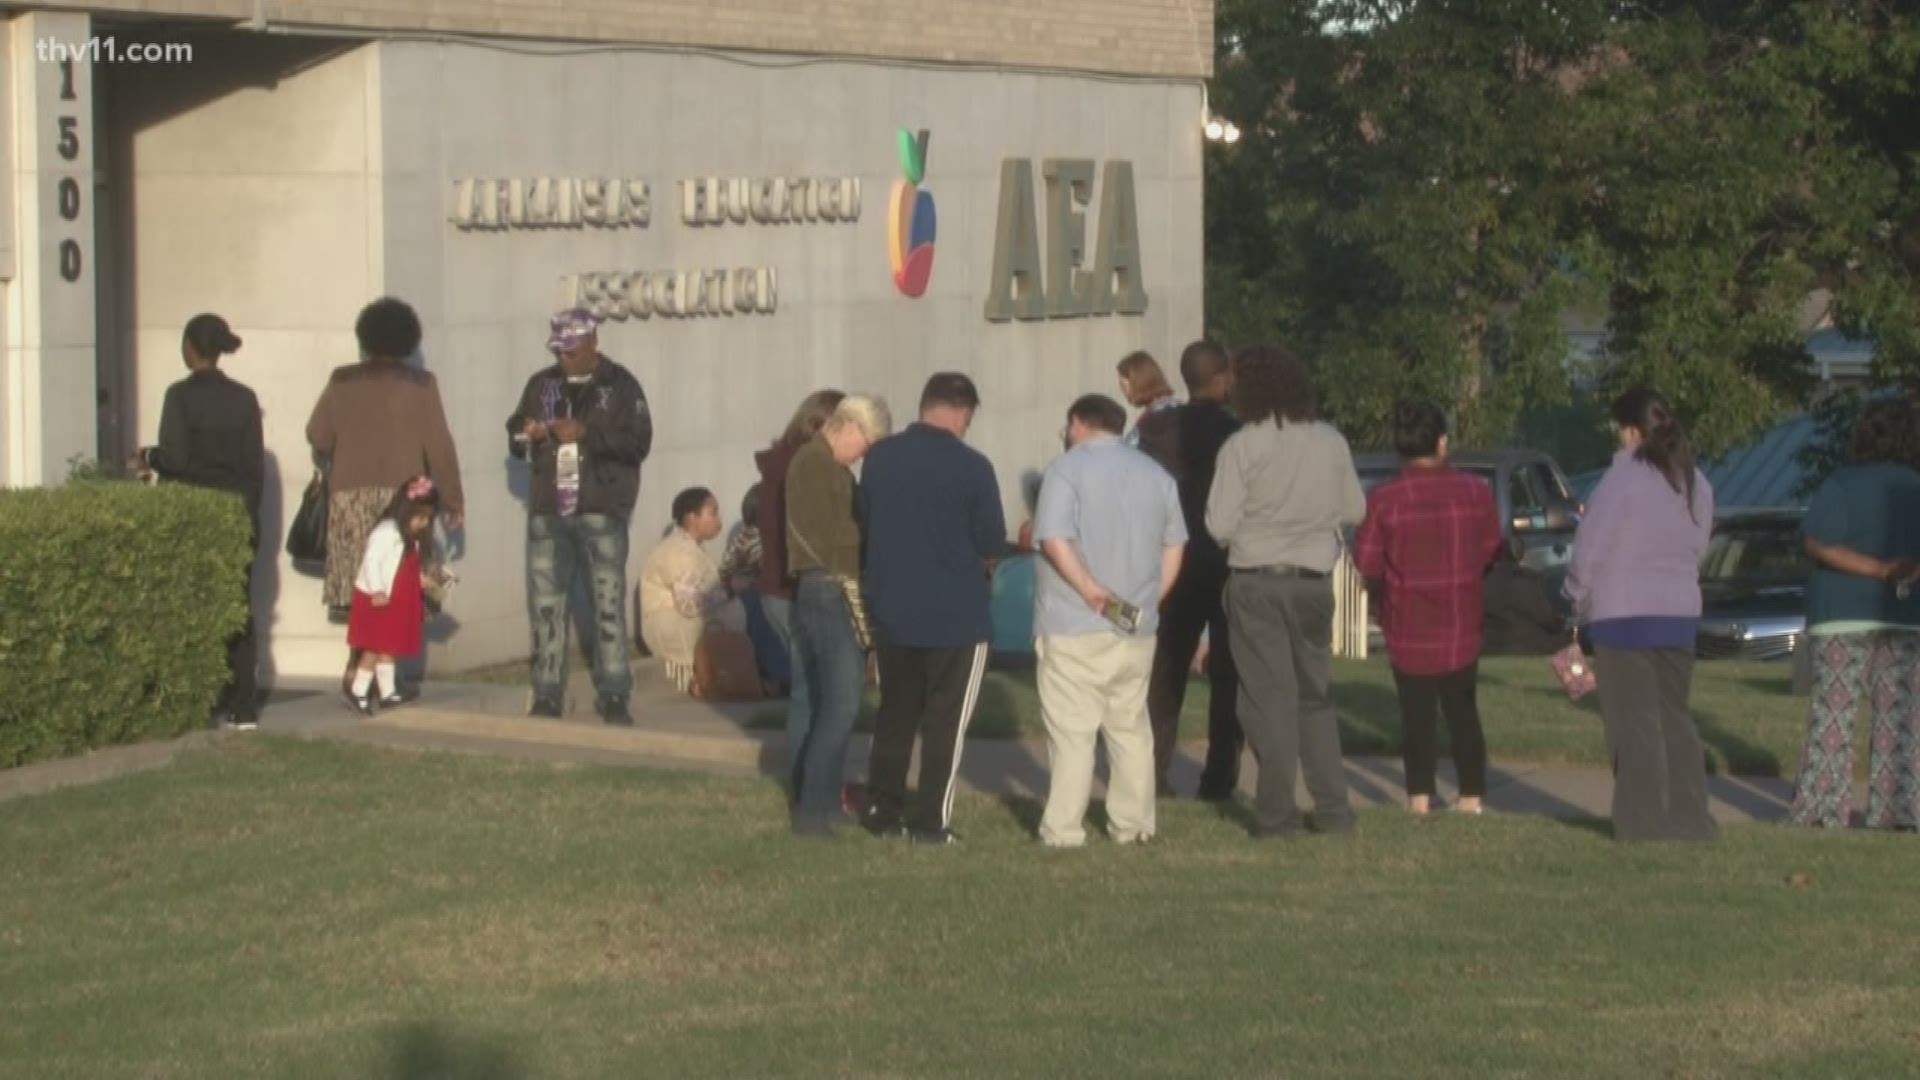 Dozens of Little Rock teachers filed in for an emergency union meeting Tuesday night. Some were forced to wait outside because the auditorium hit capacity.